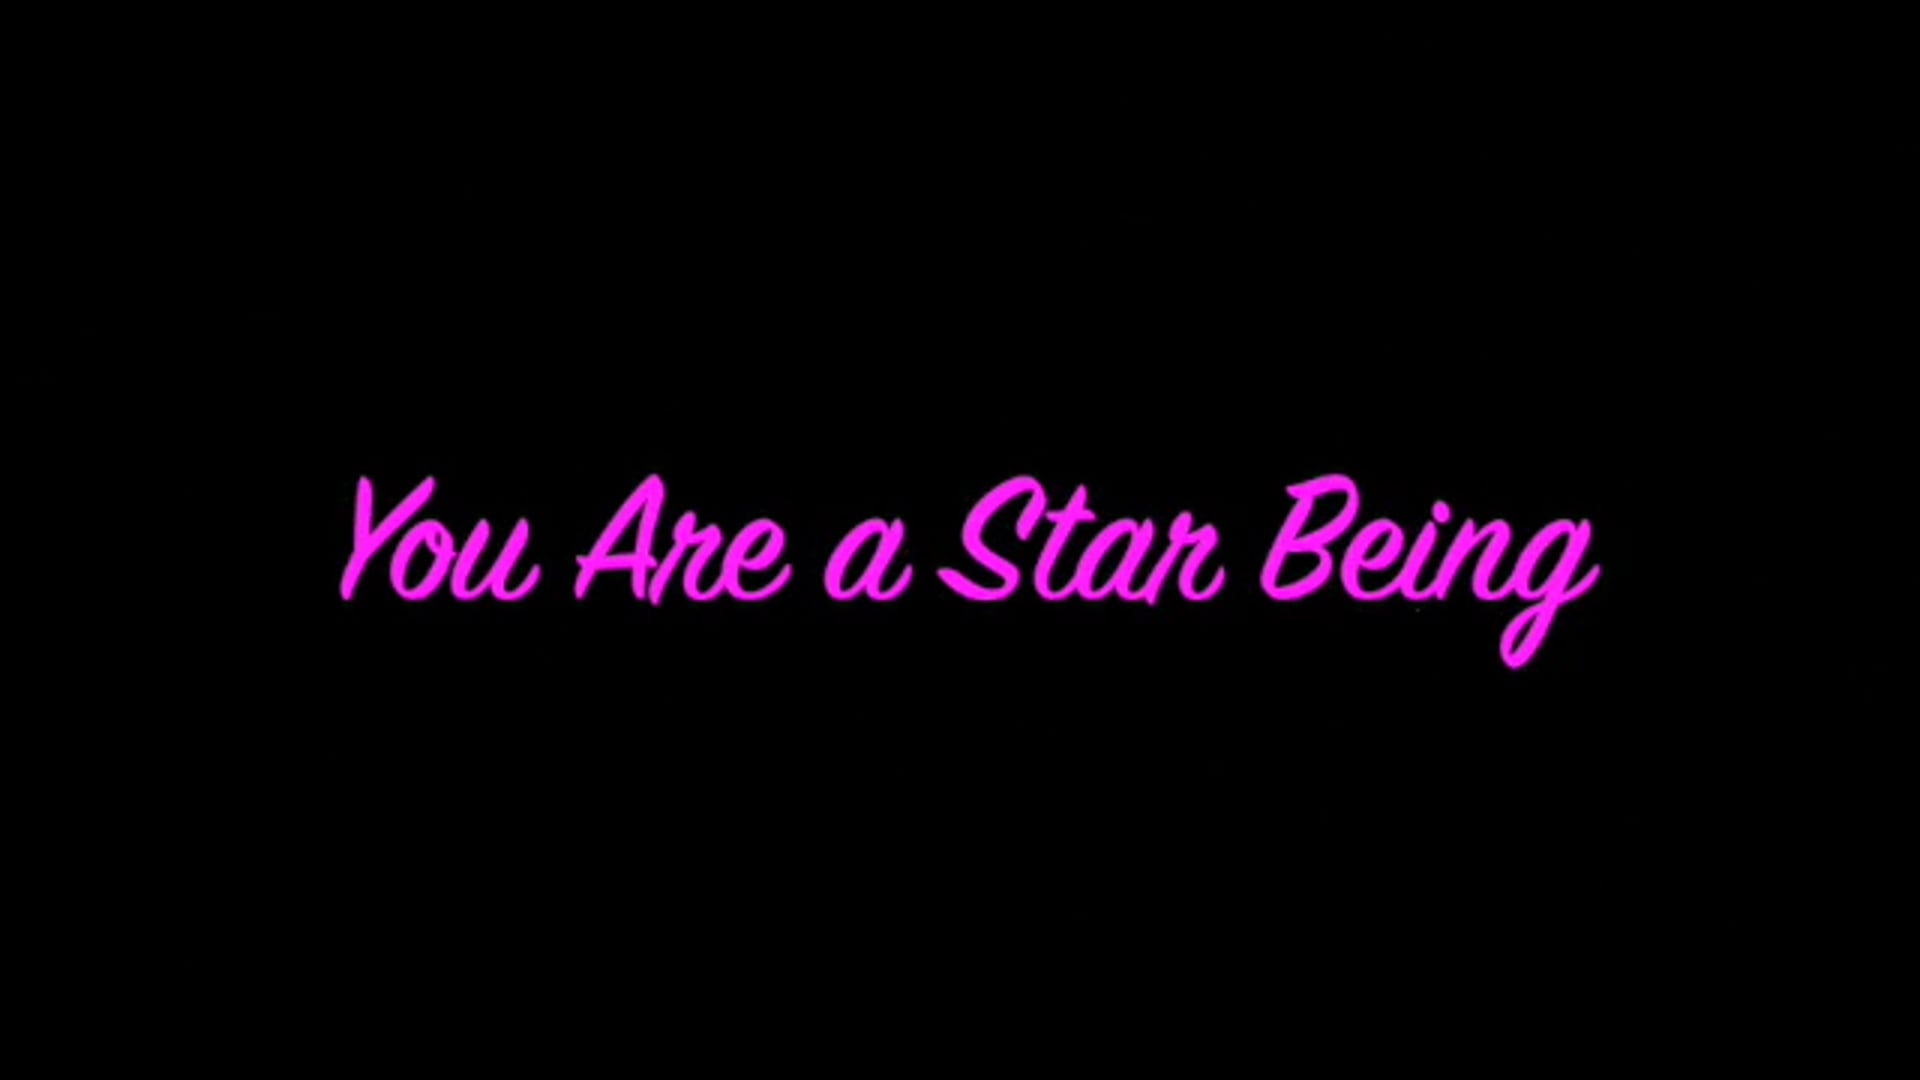 New Moon - March 13, 2021 - You Are a Star Being